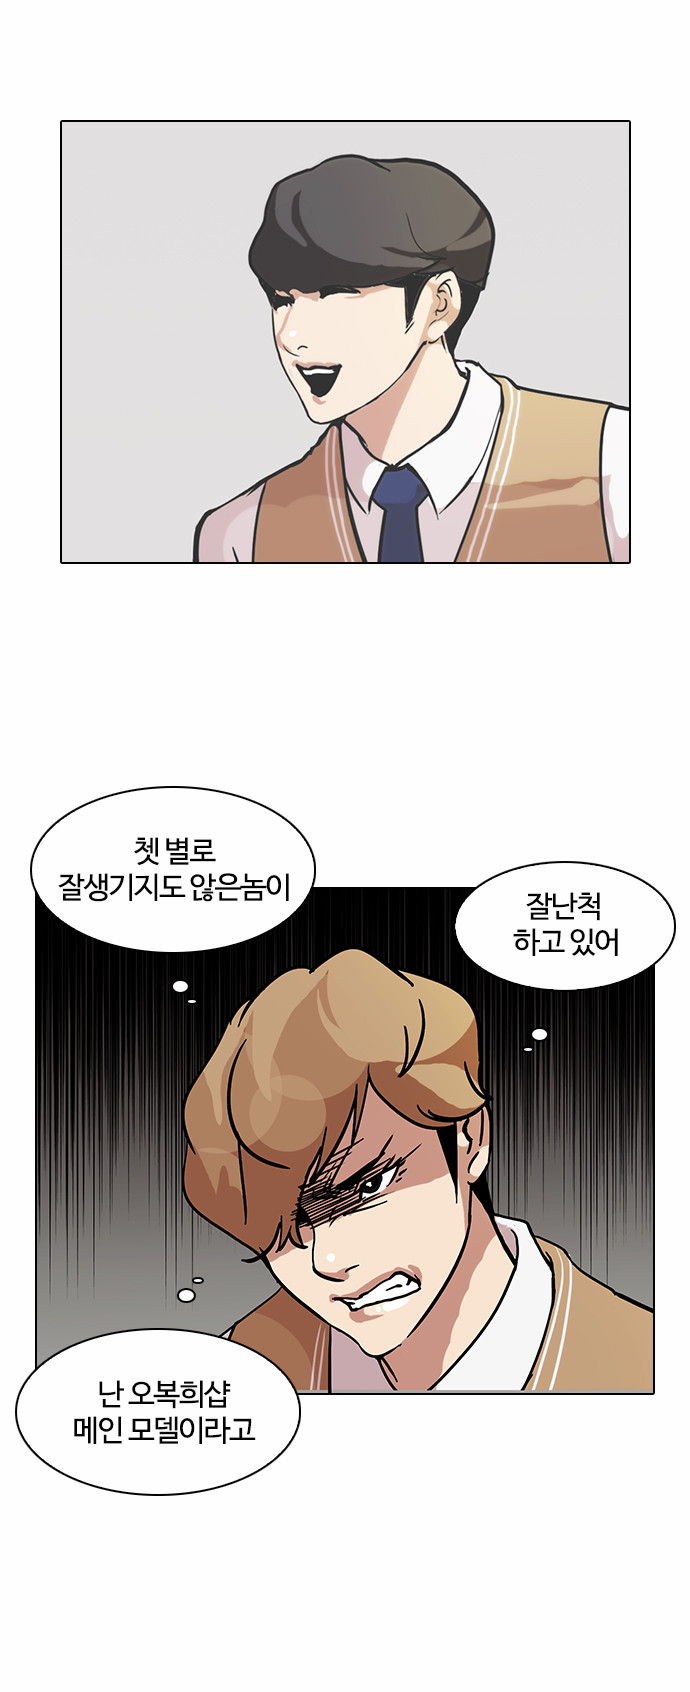 Lookism - Chapter 71 - Page 4